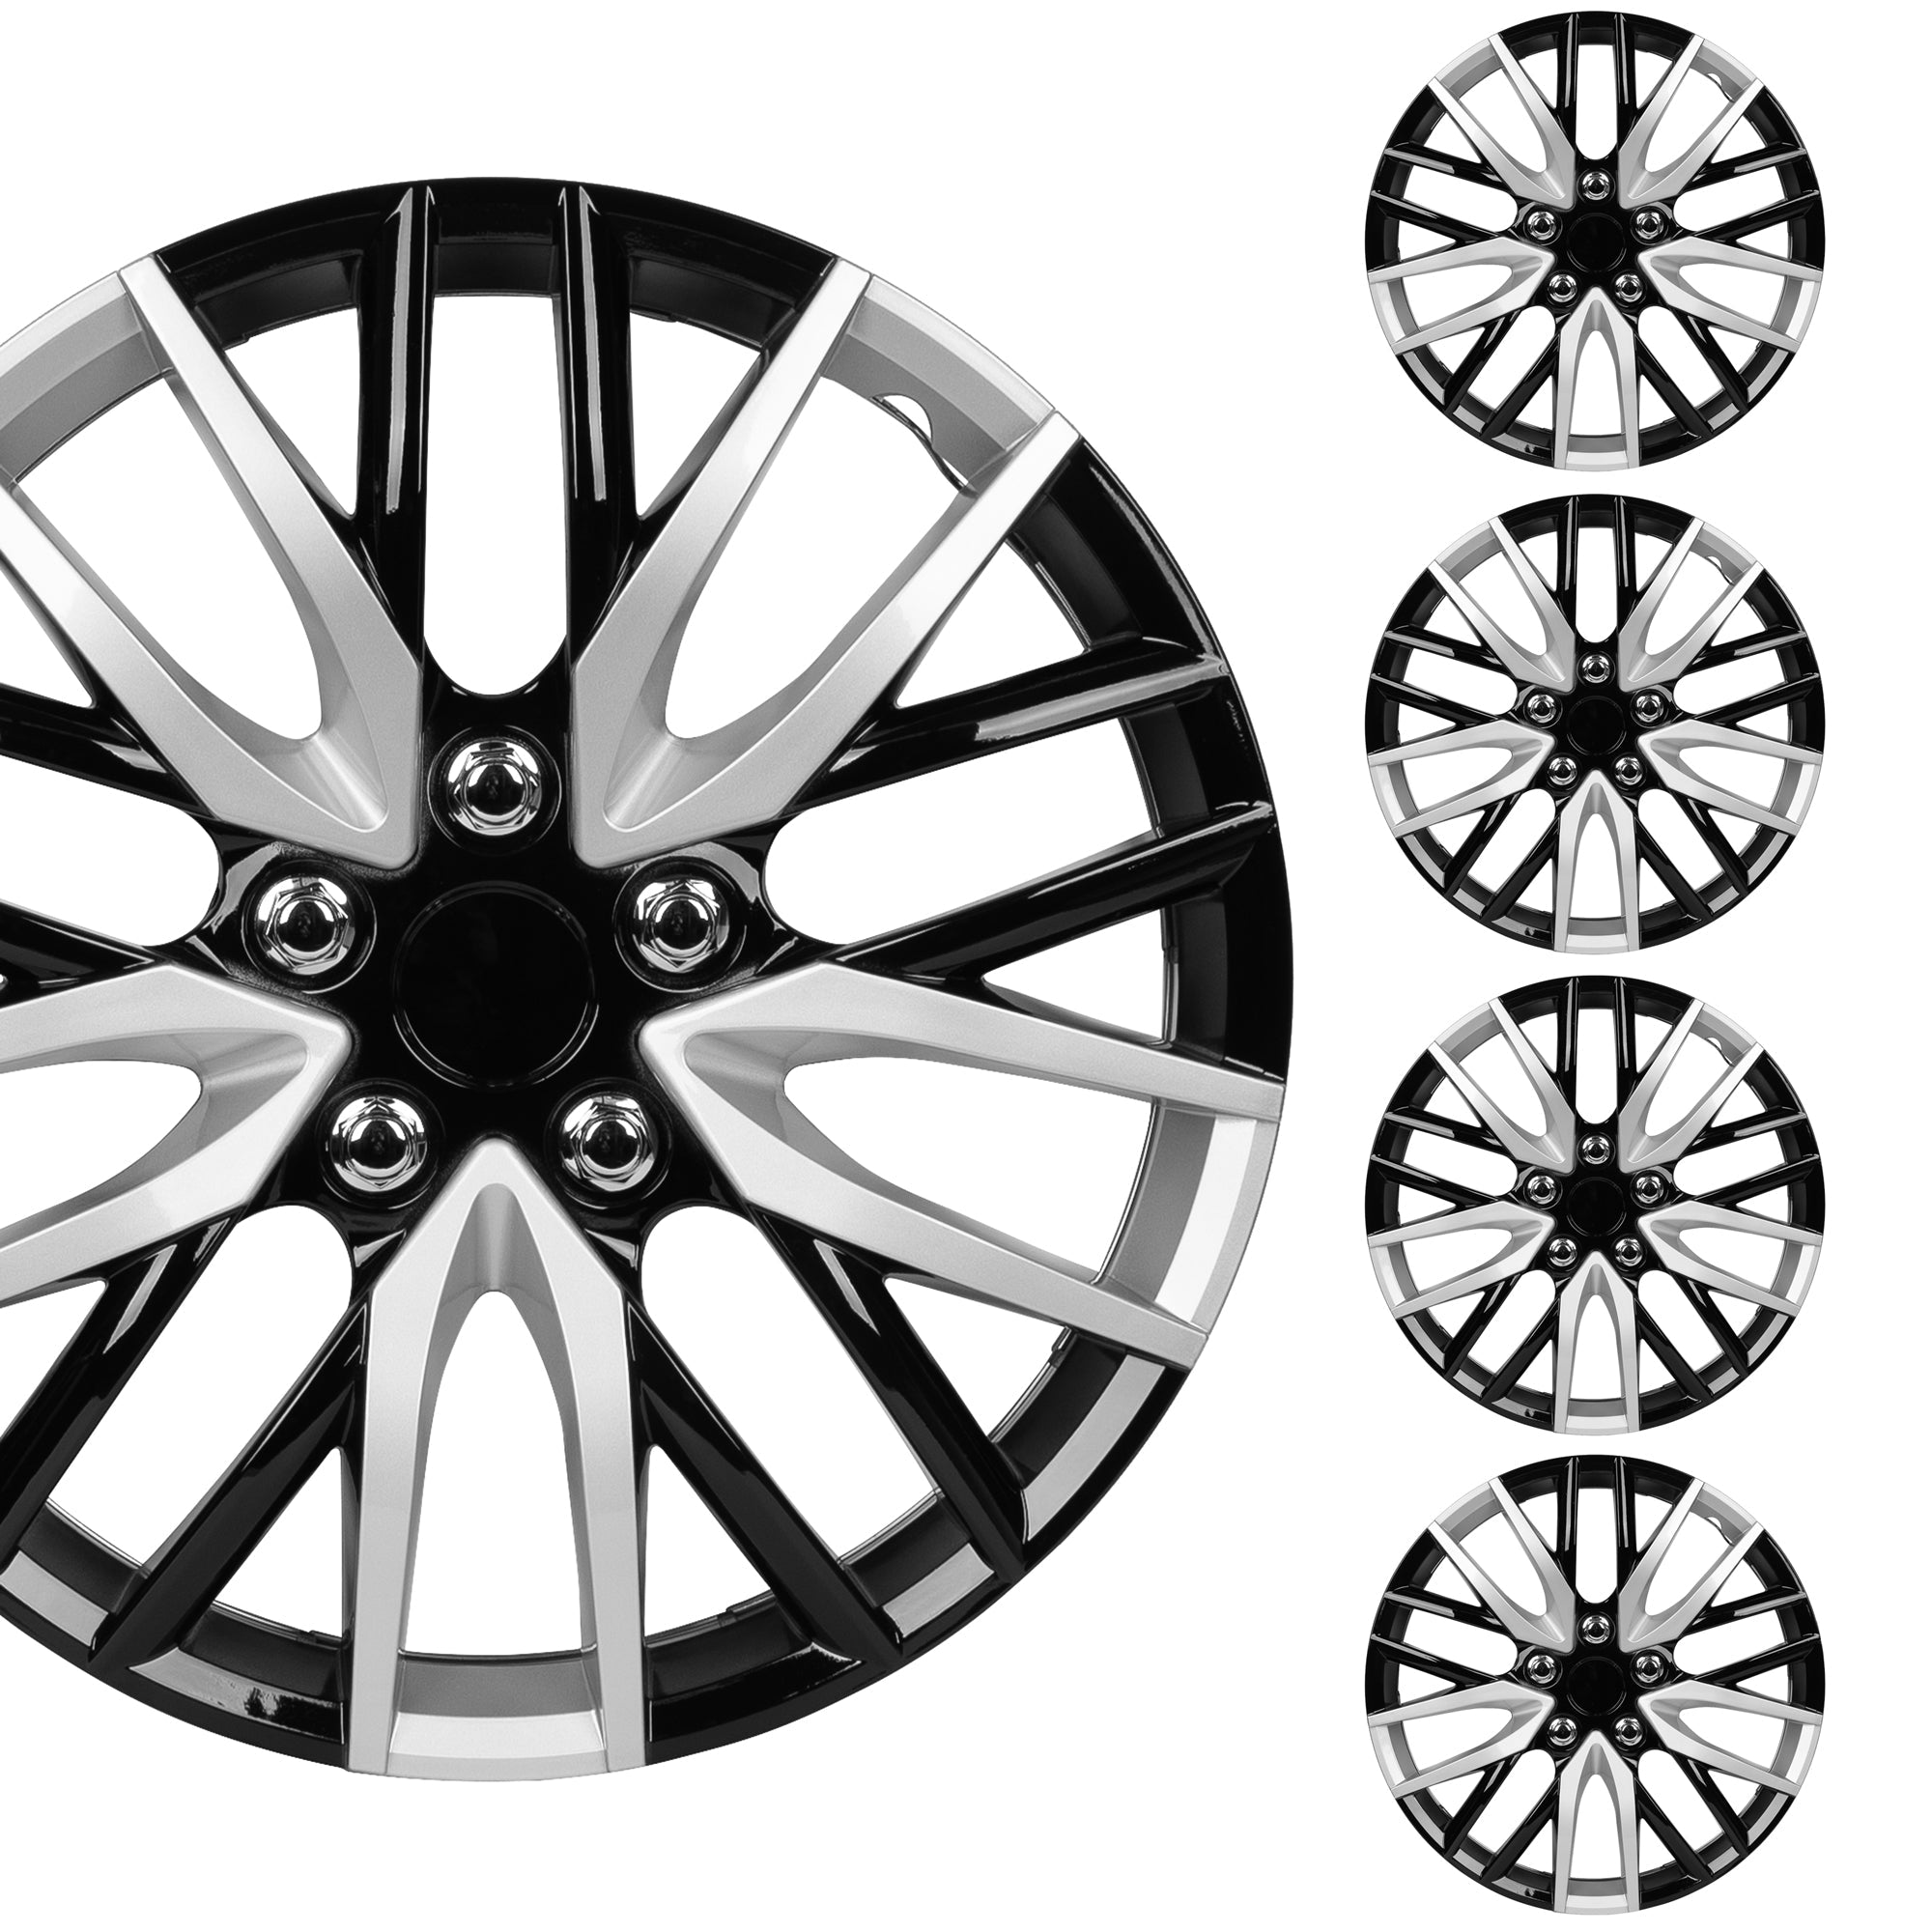 BDK (4-Pack) Premium Black/Silver Hubcaps 16" Wheel Rim Cover Hub Caps Two-Tone Style Replacement Snap On Car Truck SUV - 16 Inch Set